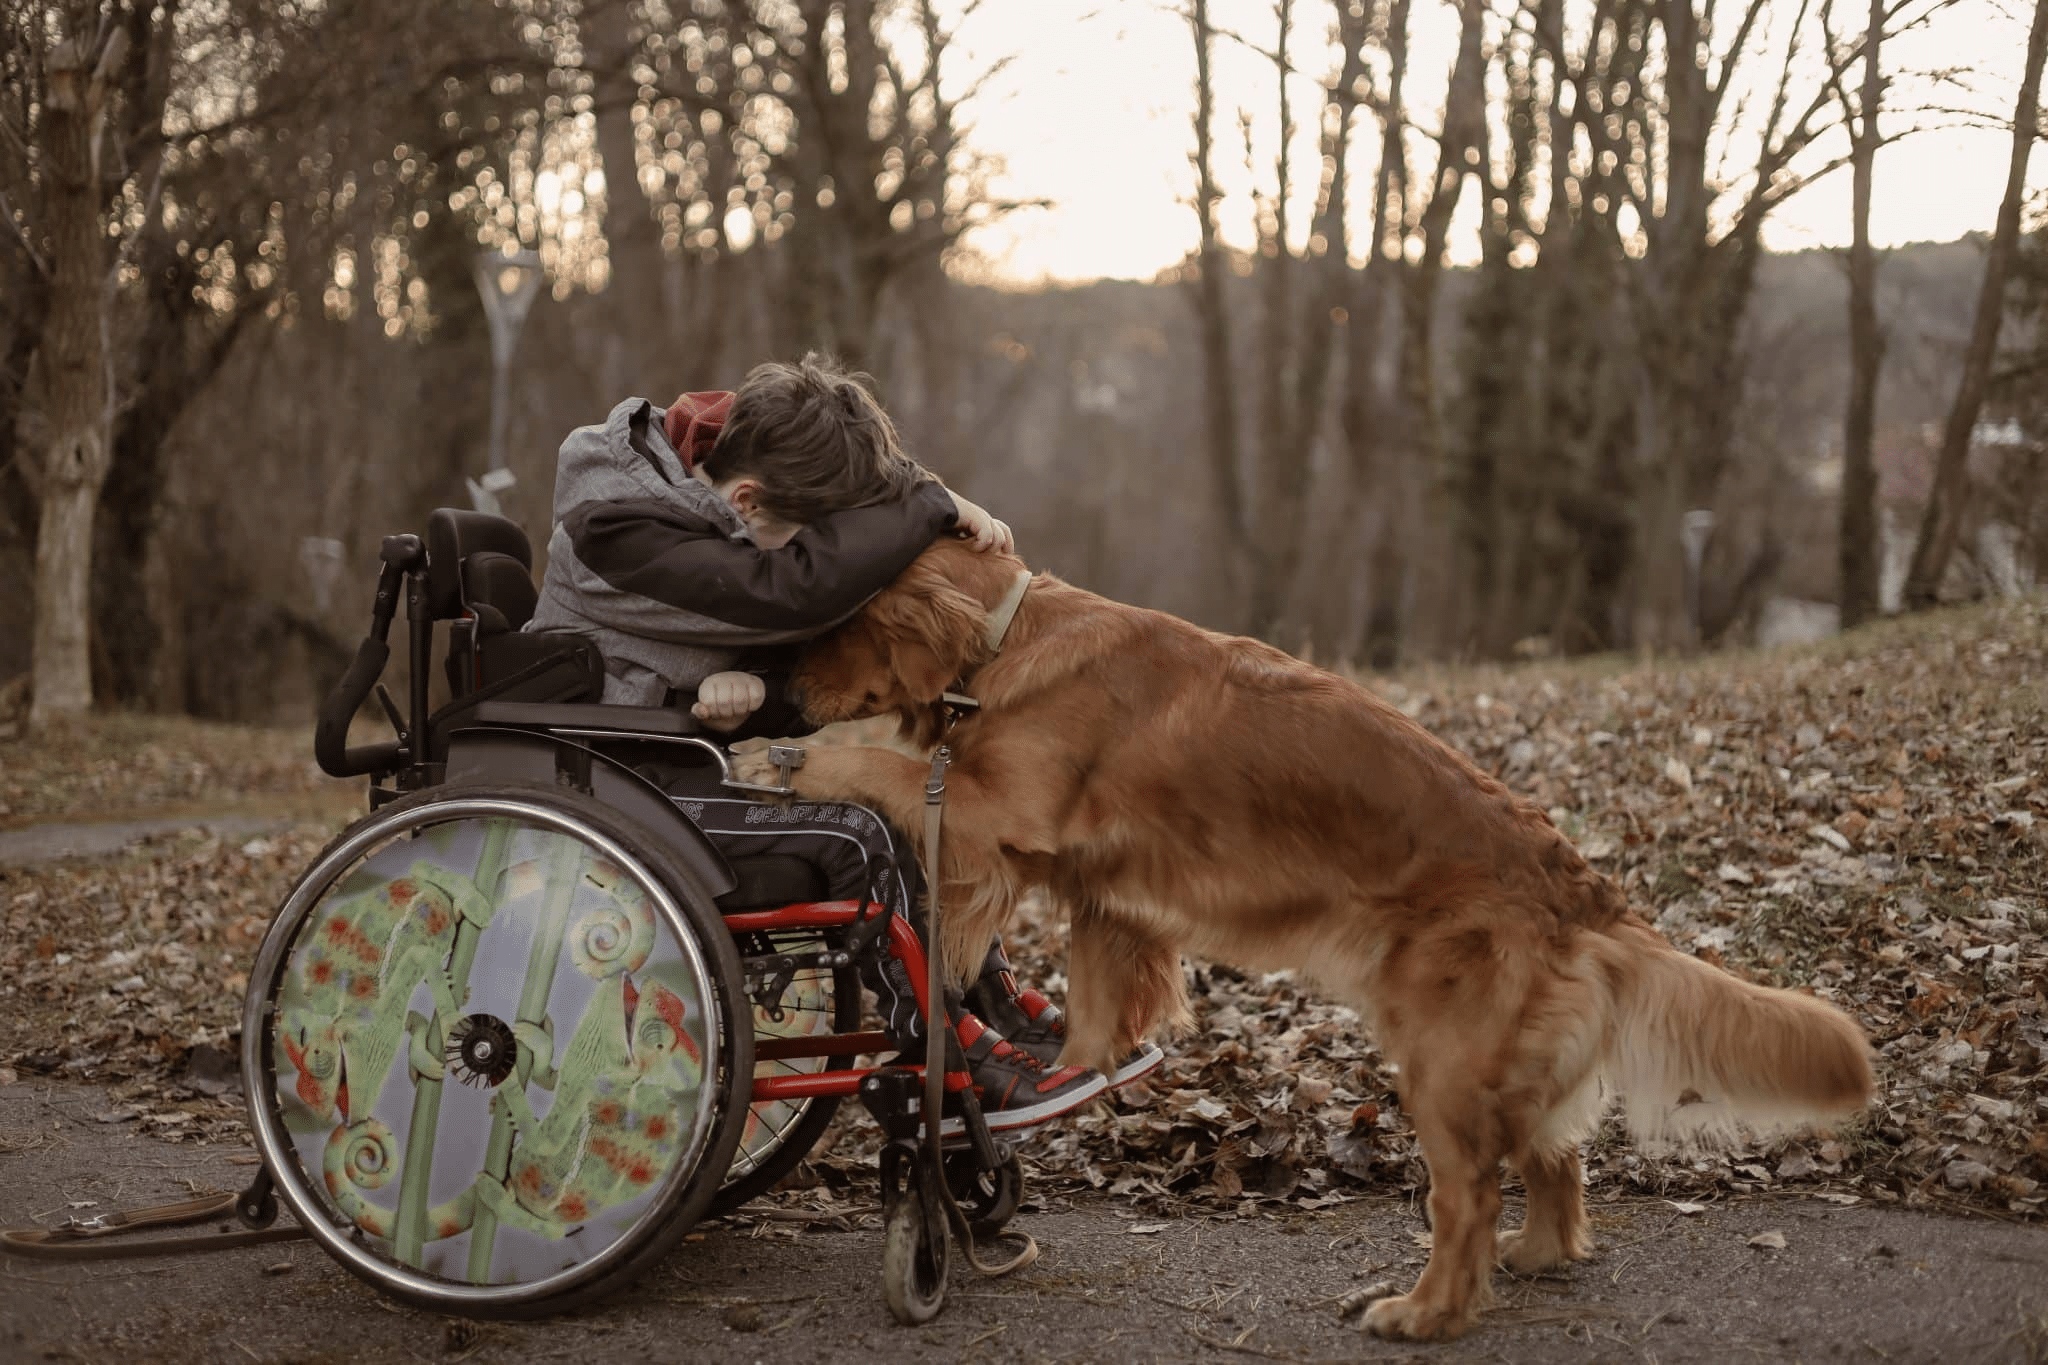 Sitting from his wheelchair, Valentin hugs his family's dog while on a walk in the forest.